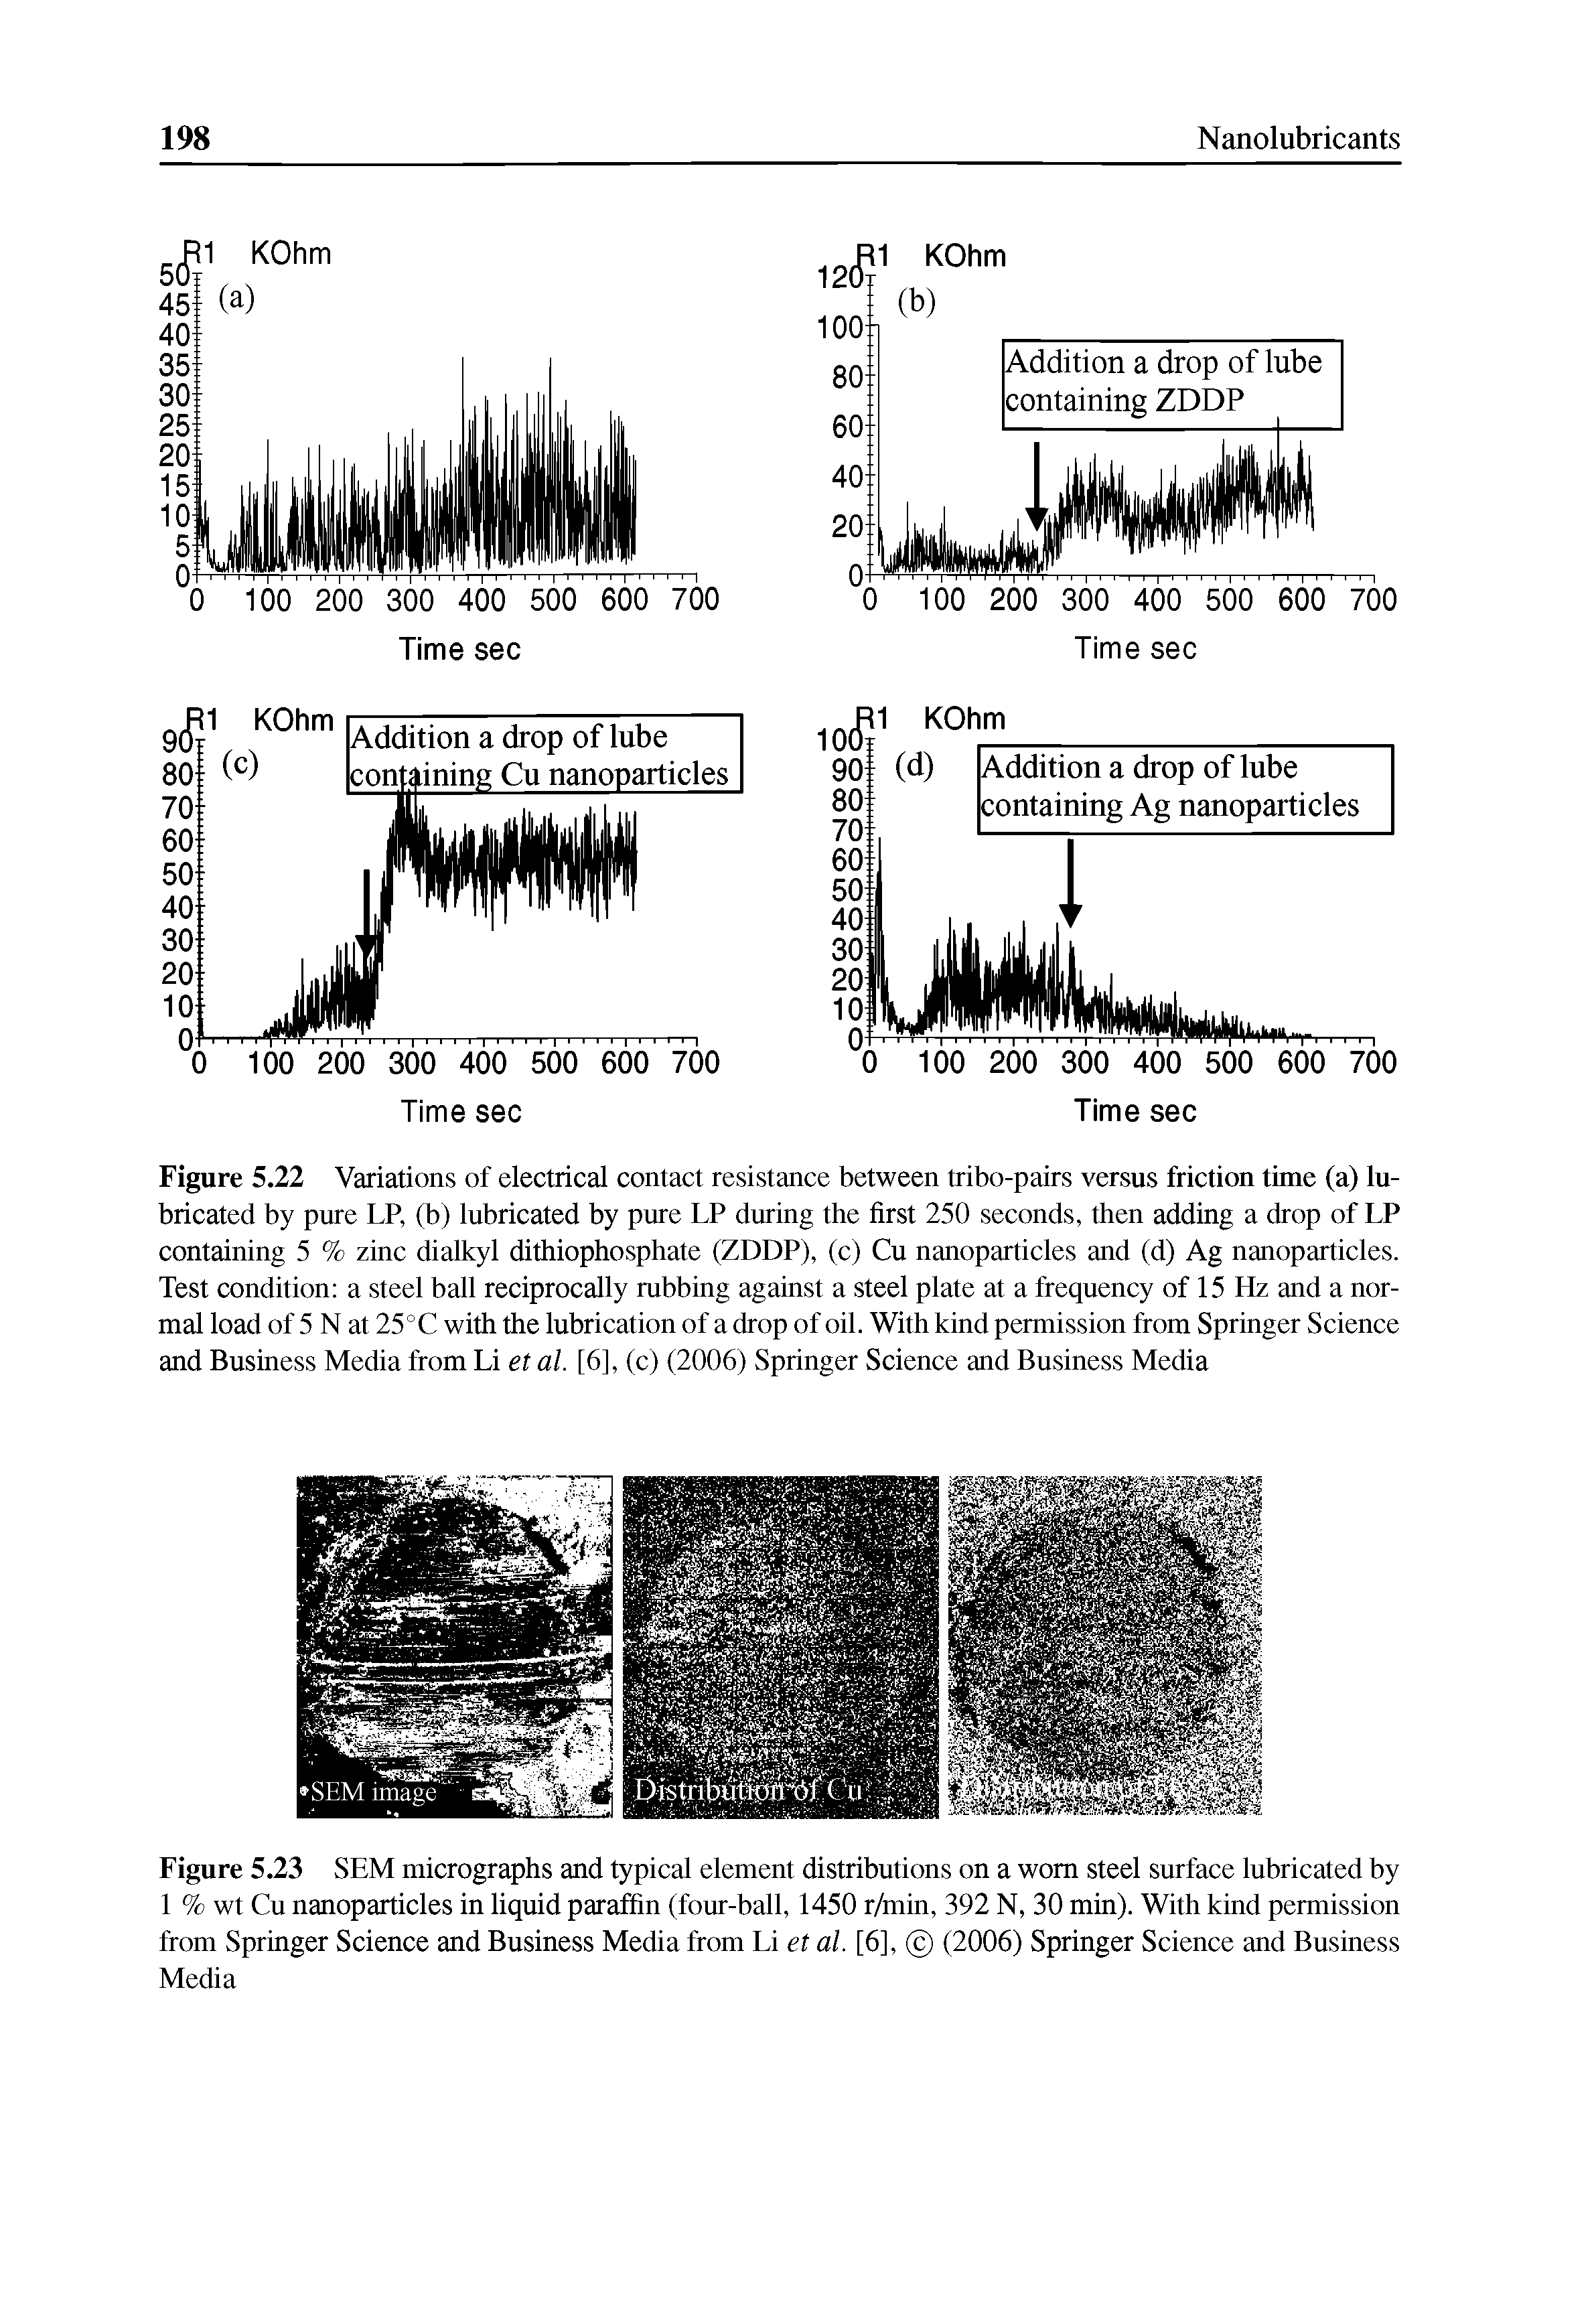 Figure 5.22 Variations of electrical contact resistance between tribo-pairs versus friction time (a) lubricated by pure LP, (b) lubricated by pure LP during the first 250 seconds, then adding a drop of LP containing 5 % zinc dialkyl dithiophosphate (ZDDP), (c) Cu nanoparticles and (d) Ag nanoparticles. Test condition a steel ball reciprocally rubbing against a steel plate at a frequency of 15 Hz and a normal load of 5 N at 25°C with the lubrication of a drop of oil. With kind permission from Springer Science and Business Media from Li et al. [6], (c) (2006) Springer Science and Business Media...